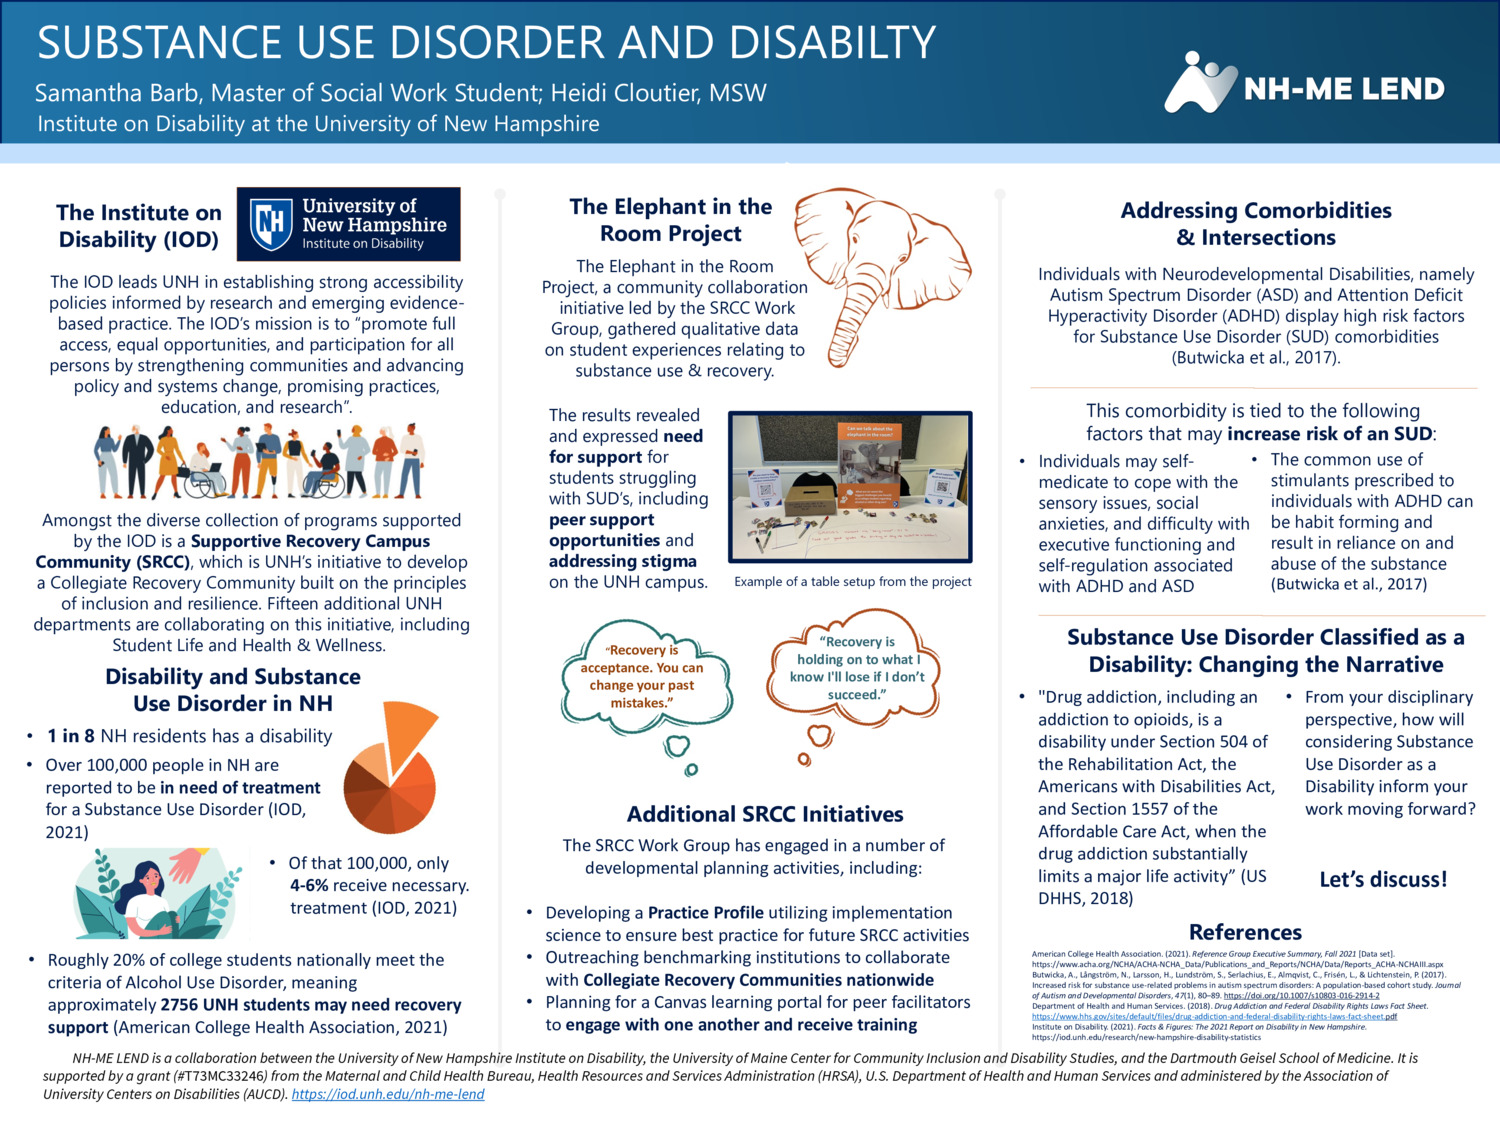 Substance Use Disorder And Disability by samrbarb11